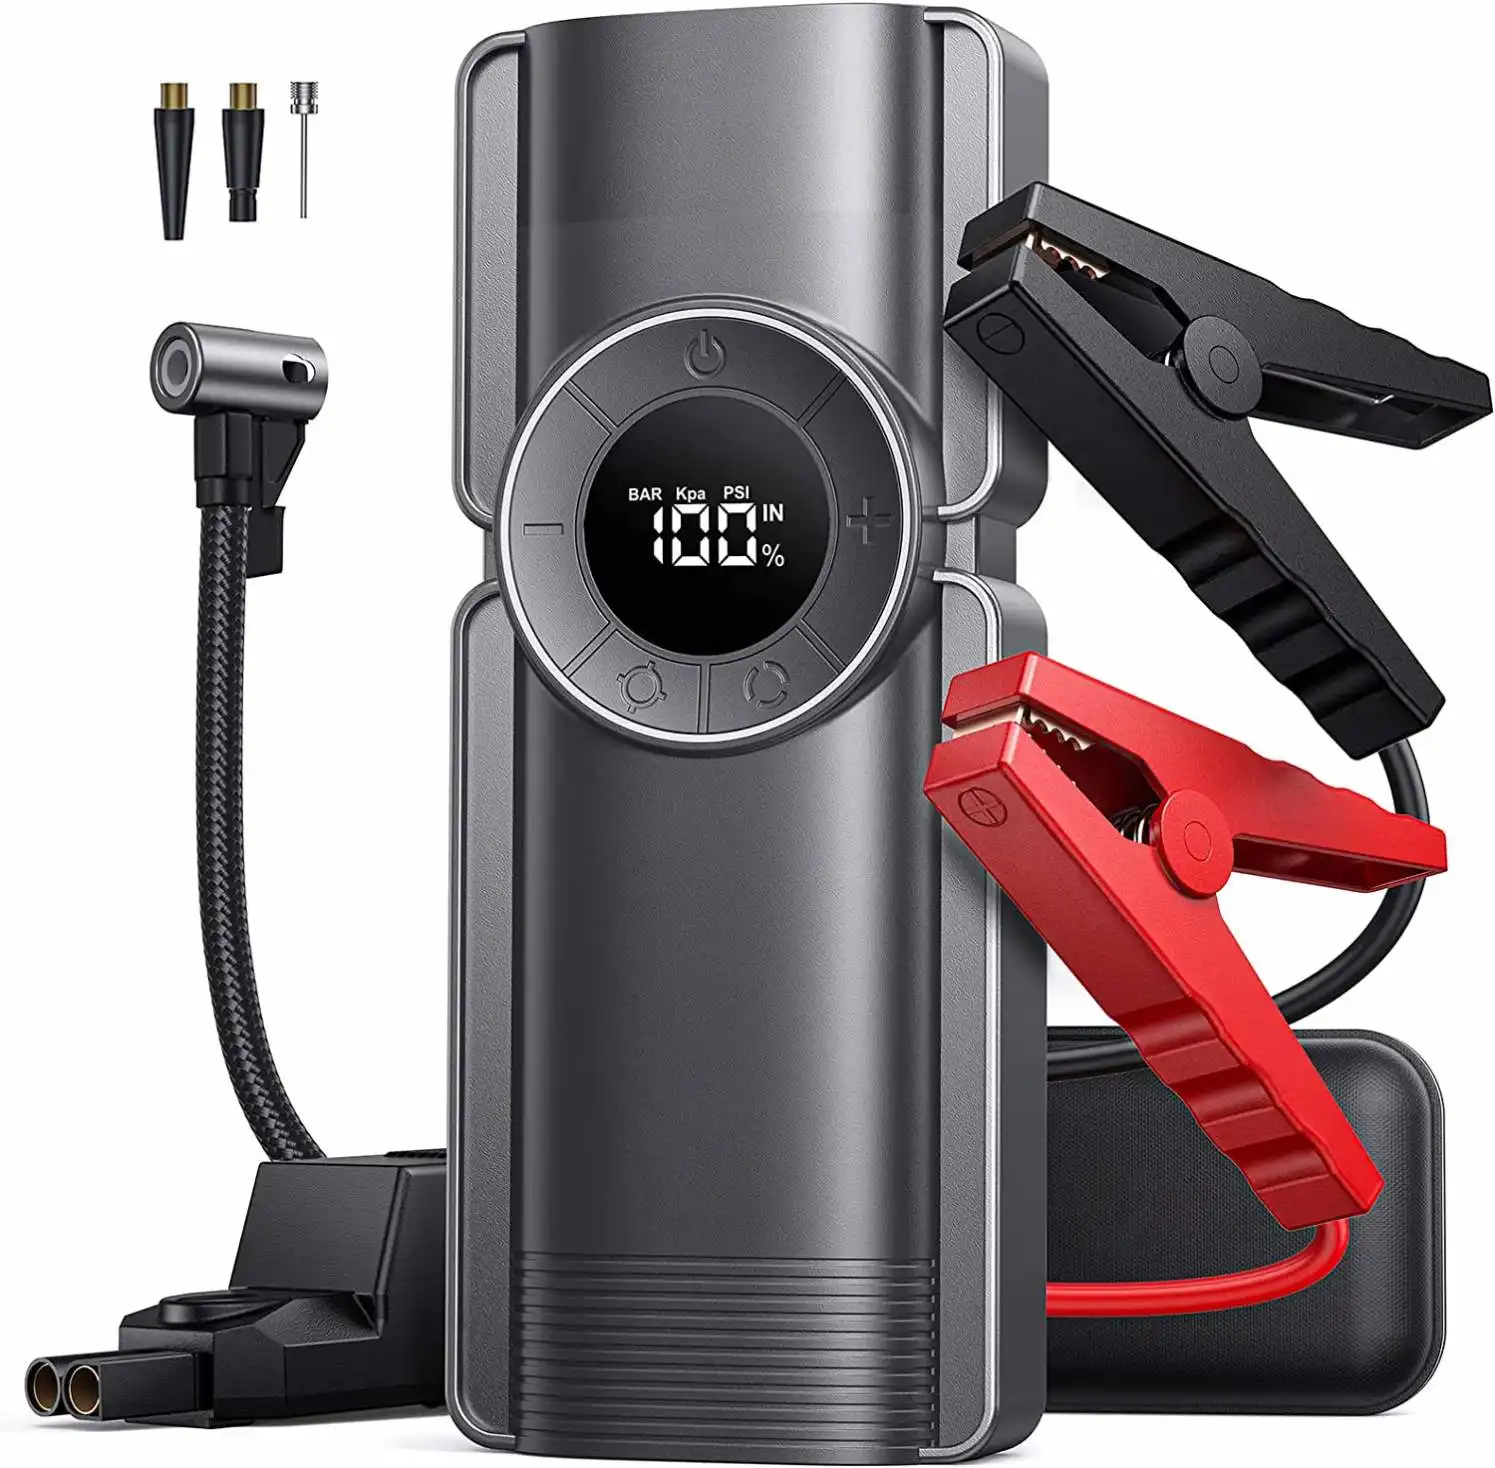 Super capacitor 10000 mah jumper battery pack car booster lithium power bank jump starter with air compressor